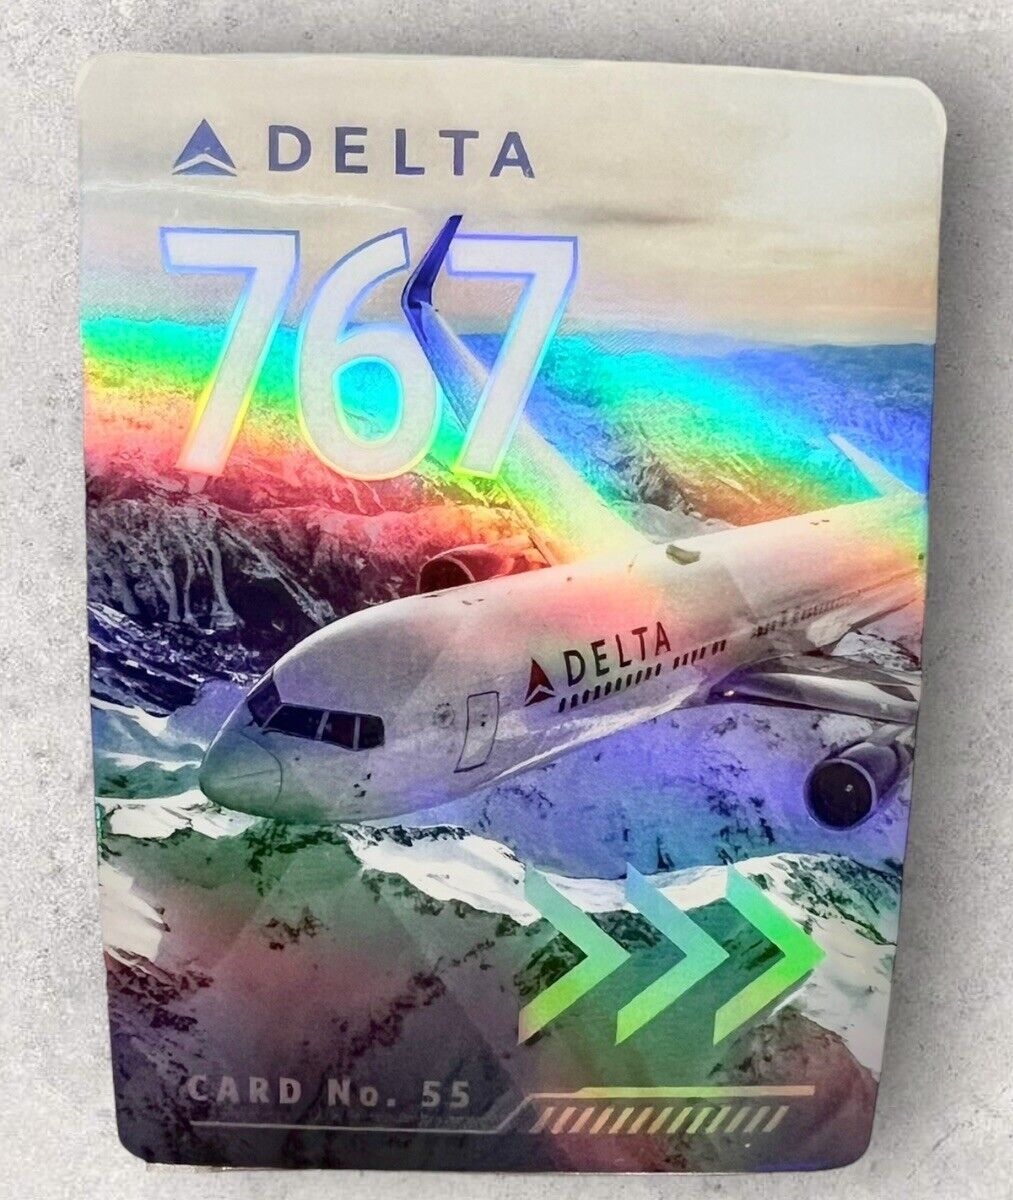 Delta Airlines Collectible Pilot’s Trading Card Boeing 767-300ER No.55 New